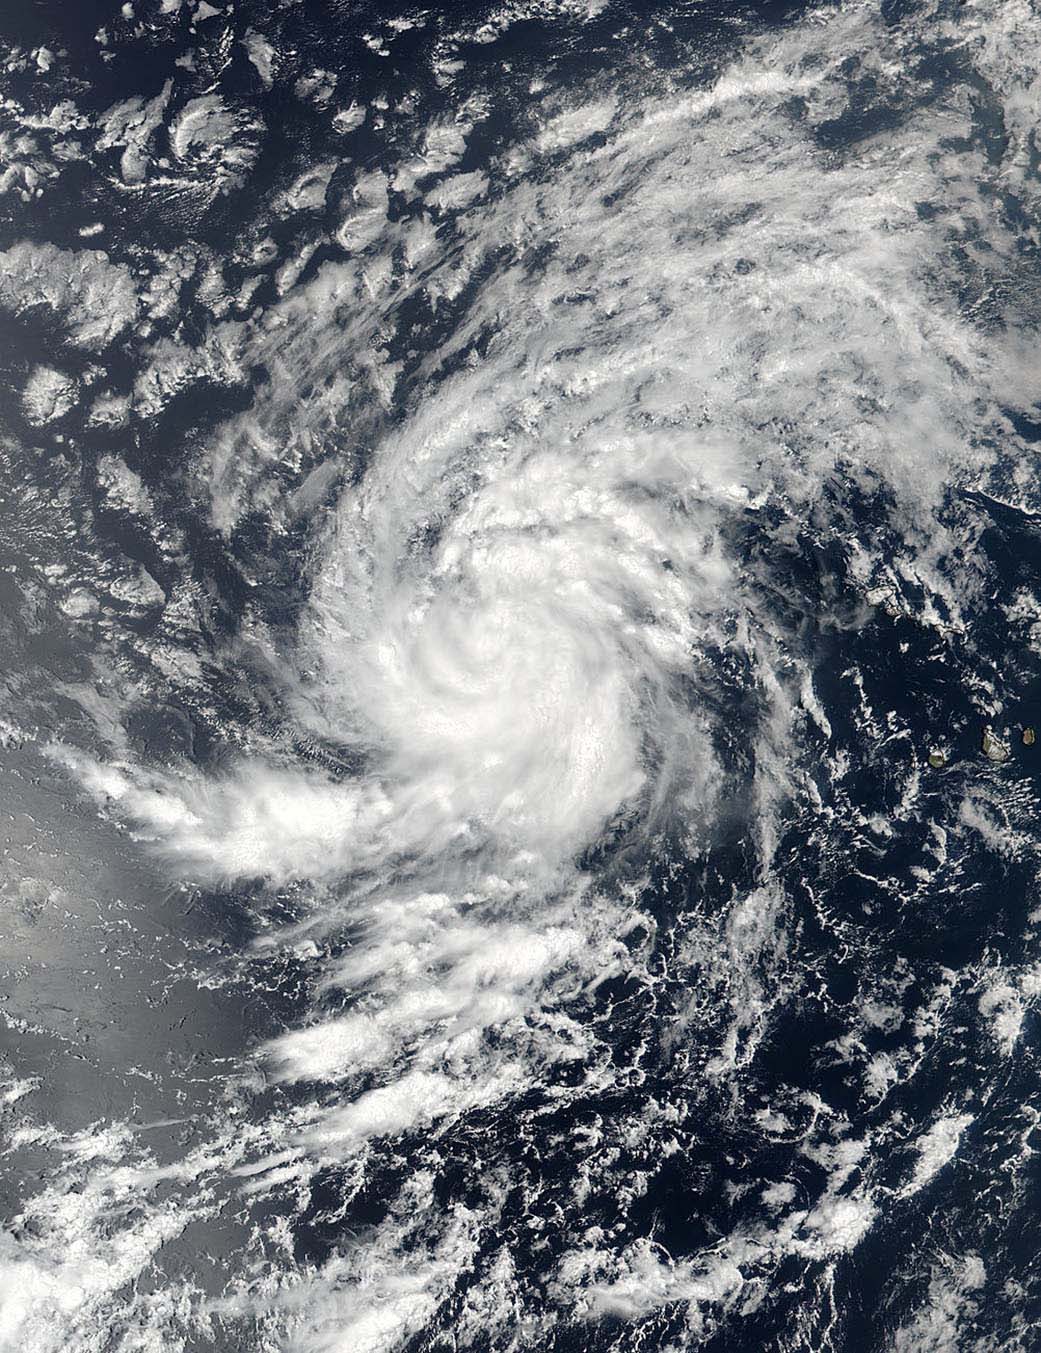 Satellite image of Tropical Storm Irma pictured here in the Eastern Atlantic Ocean